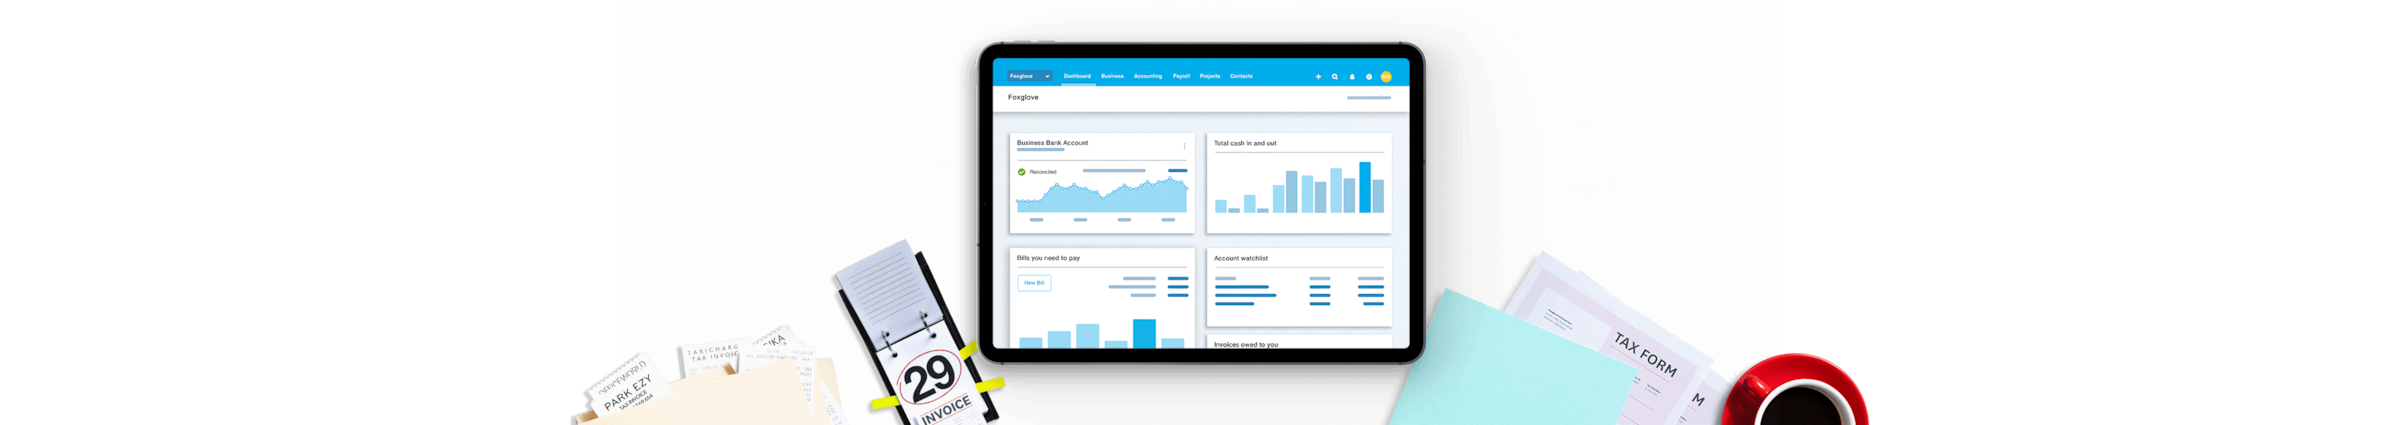 tablet with xero software dashboard